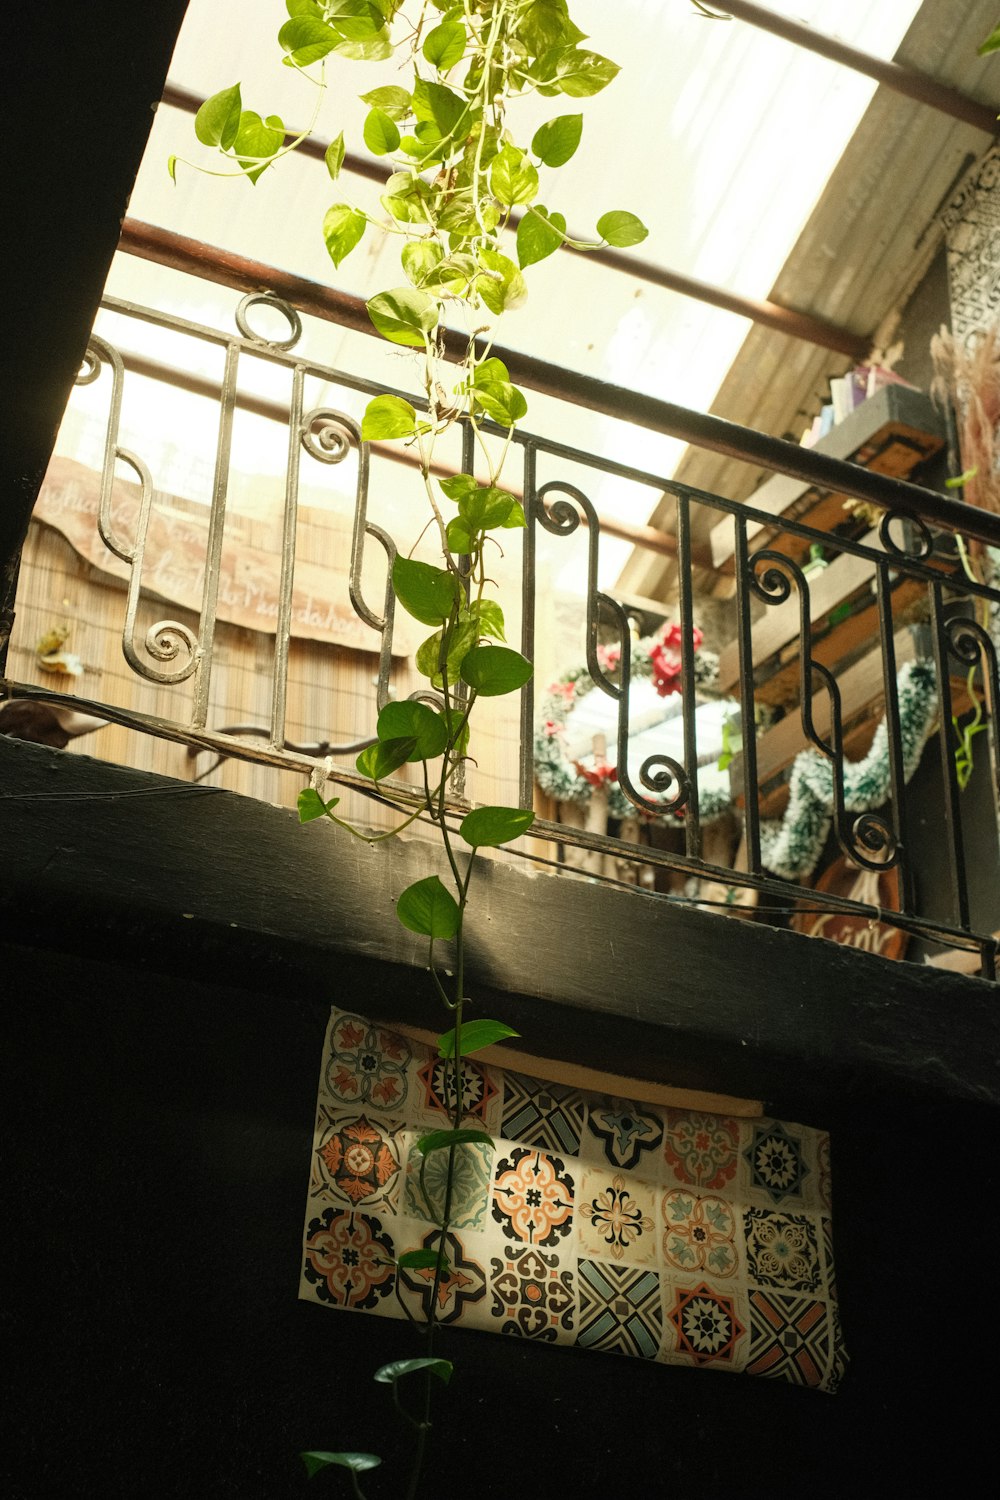 a plant is growing on a balcony railing